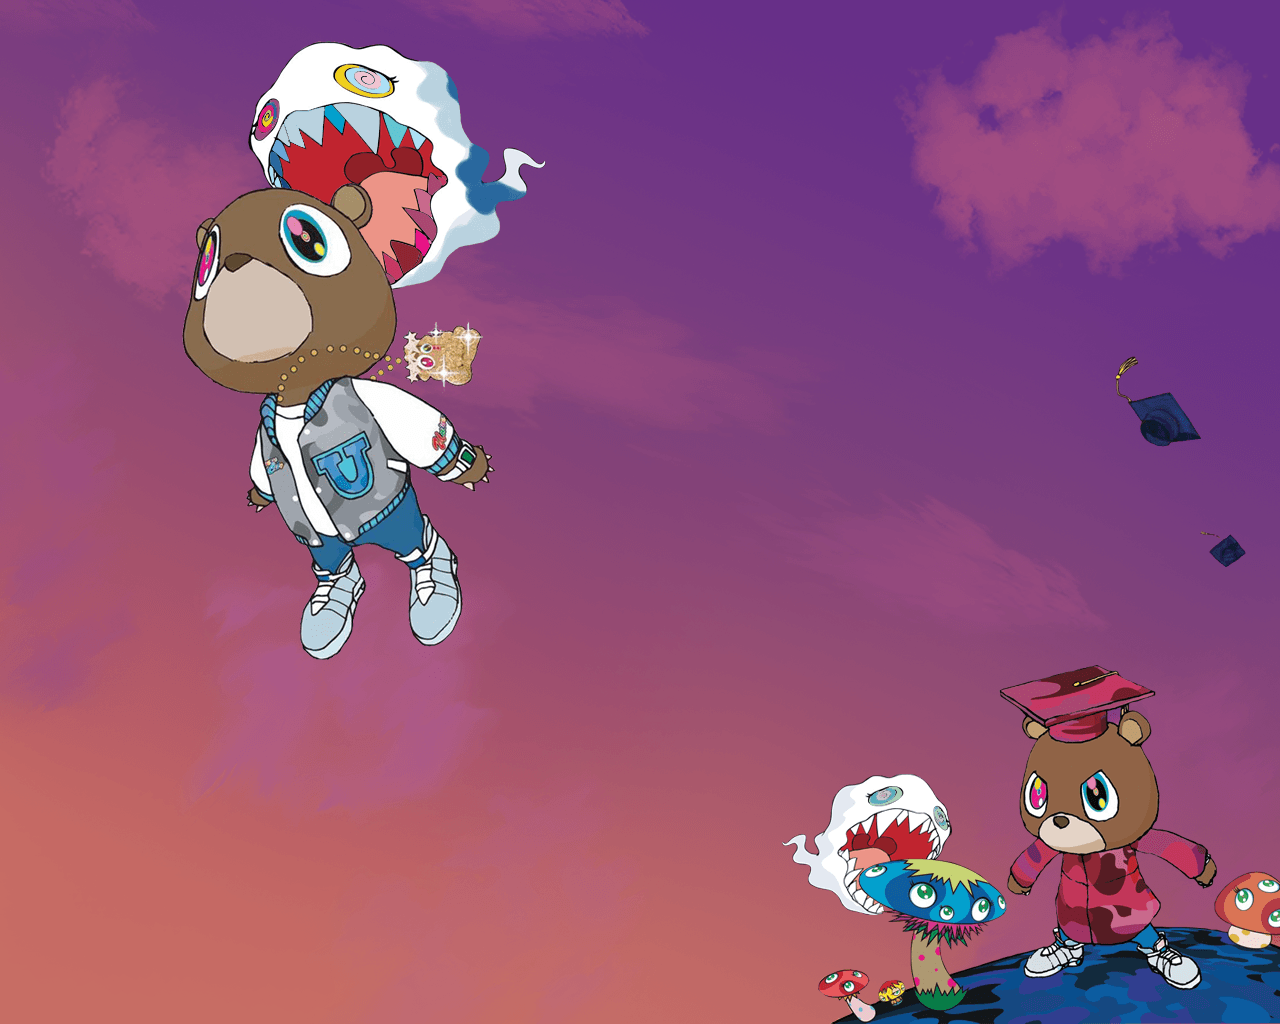 Took my favorite alternate covers of MBDTF and made a desktop background  hope you like them  rKanye